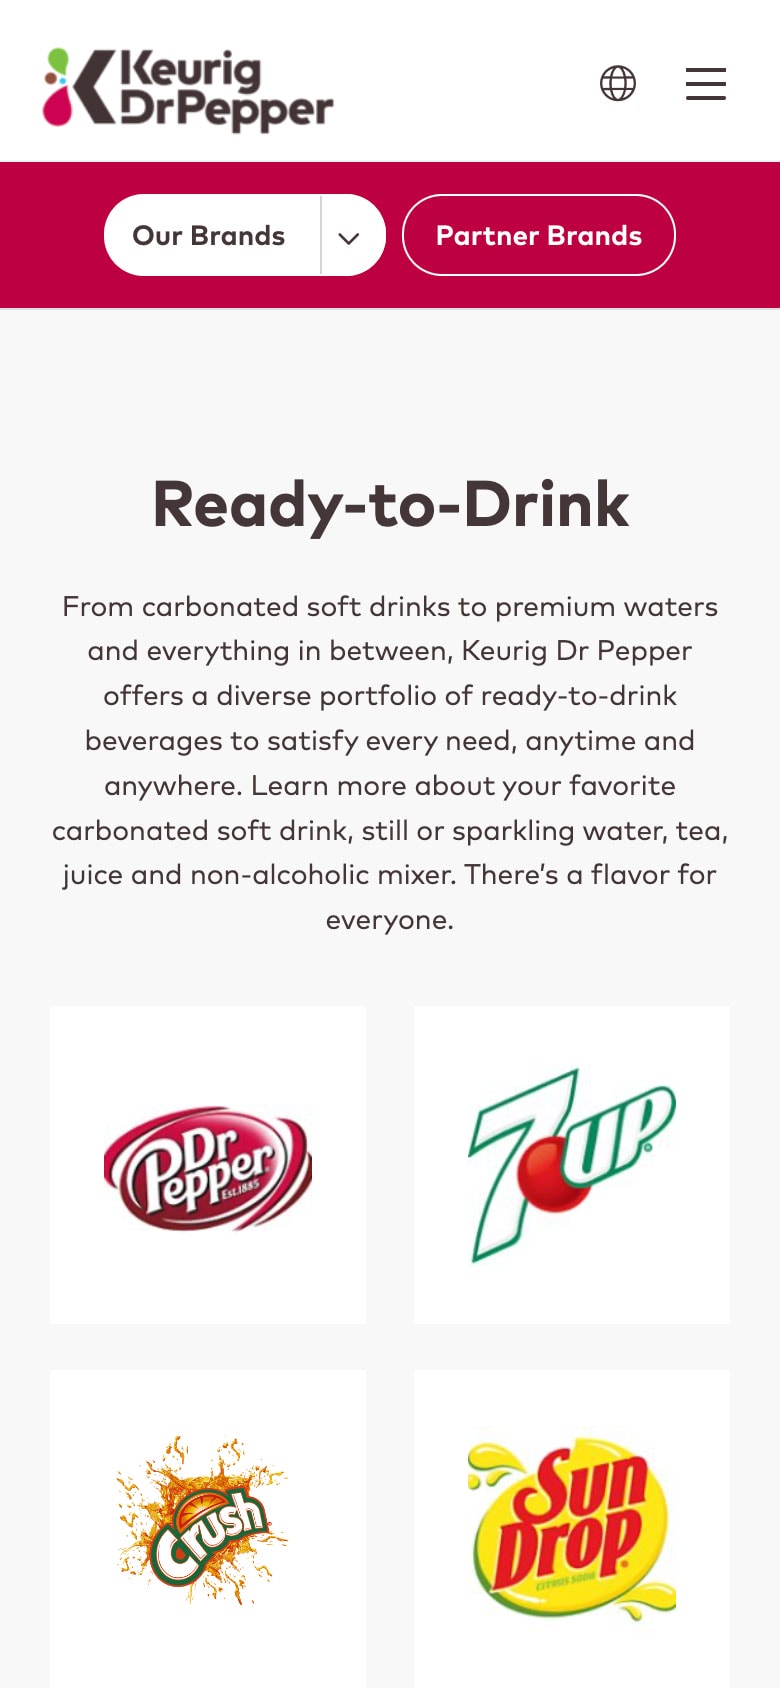 Keurig Dr Pepper family of brands page (mobile)